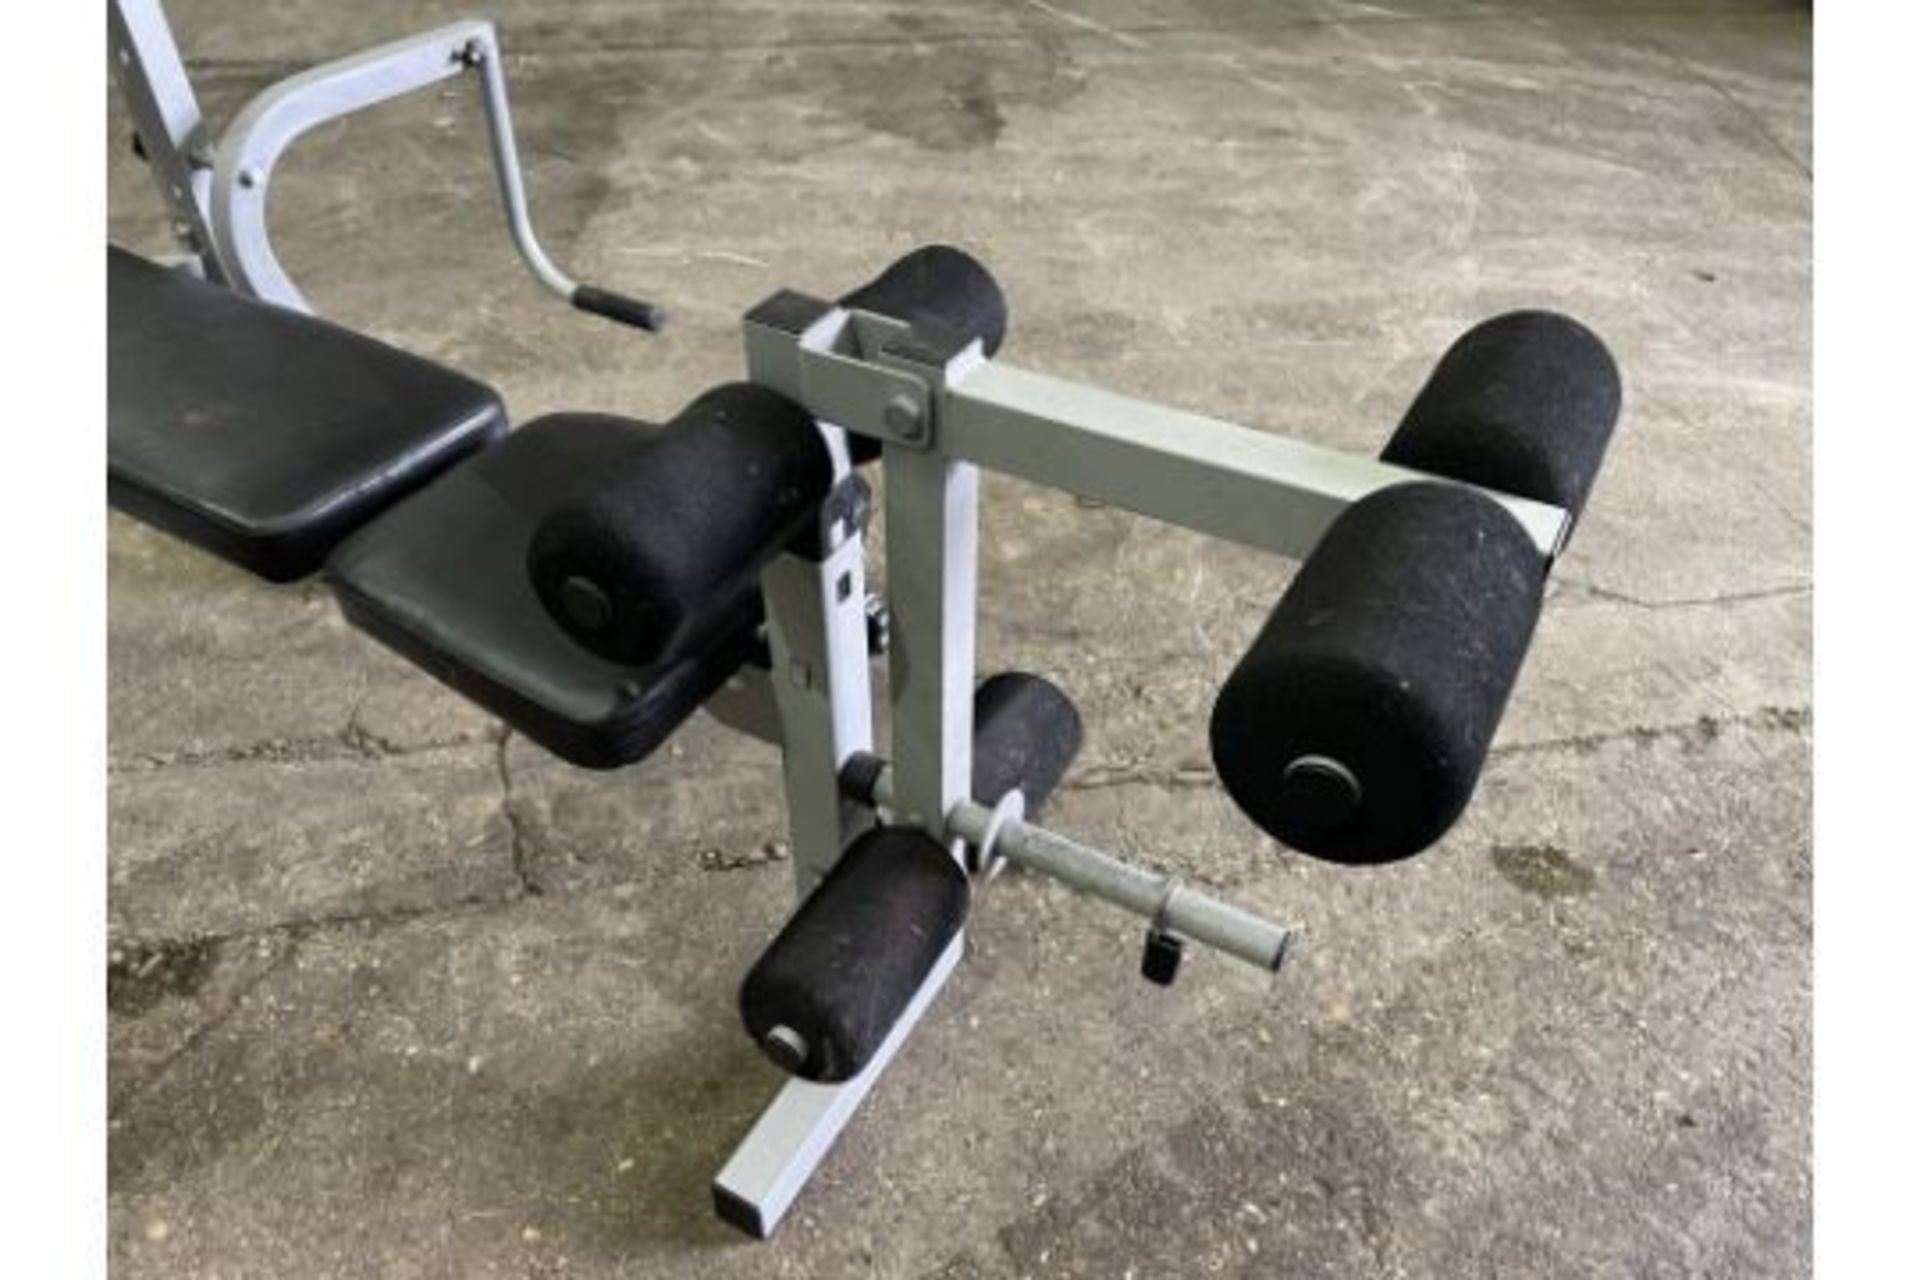 York Fitness Heavy Duty Multi-function Barbell Bench - Image 6 of 12